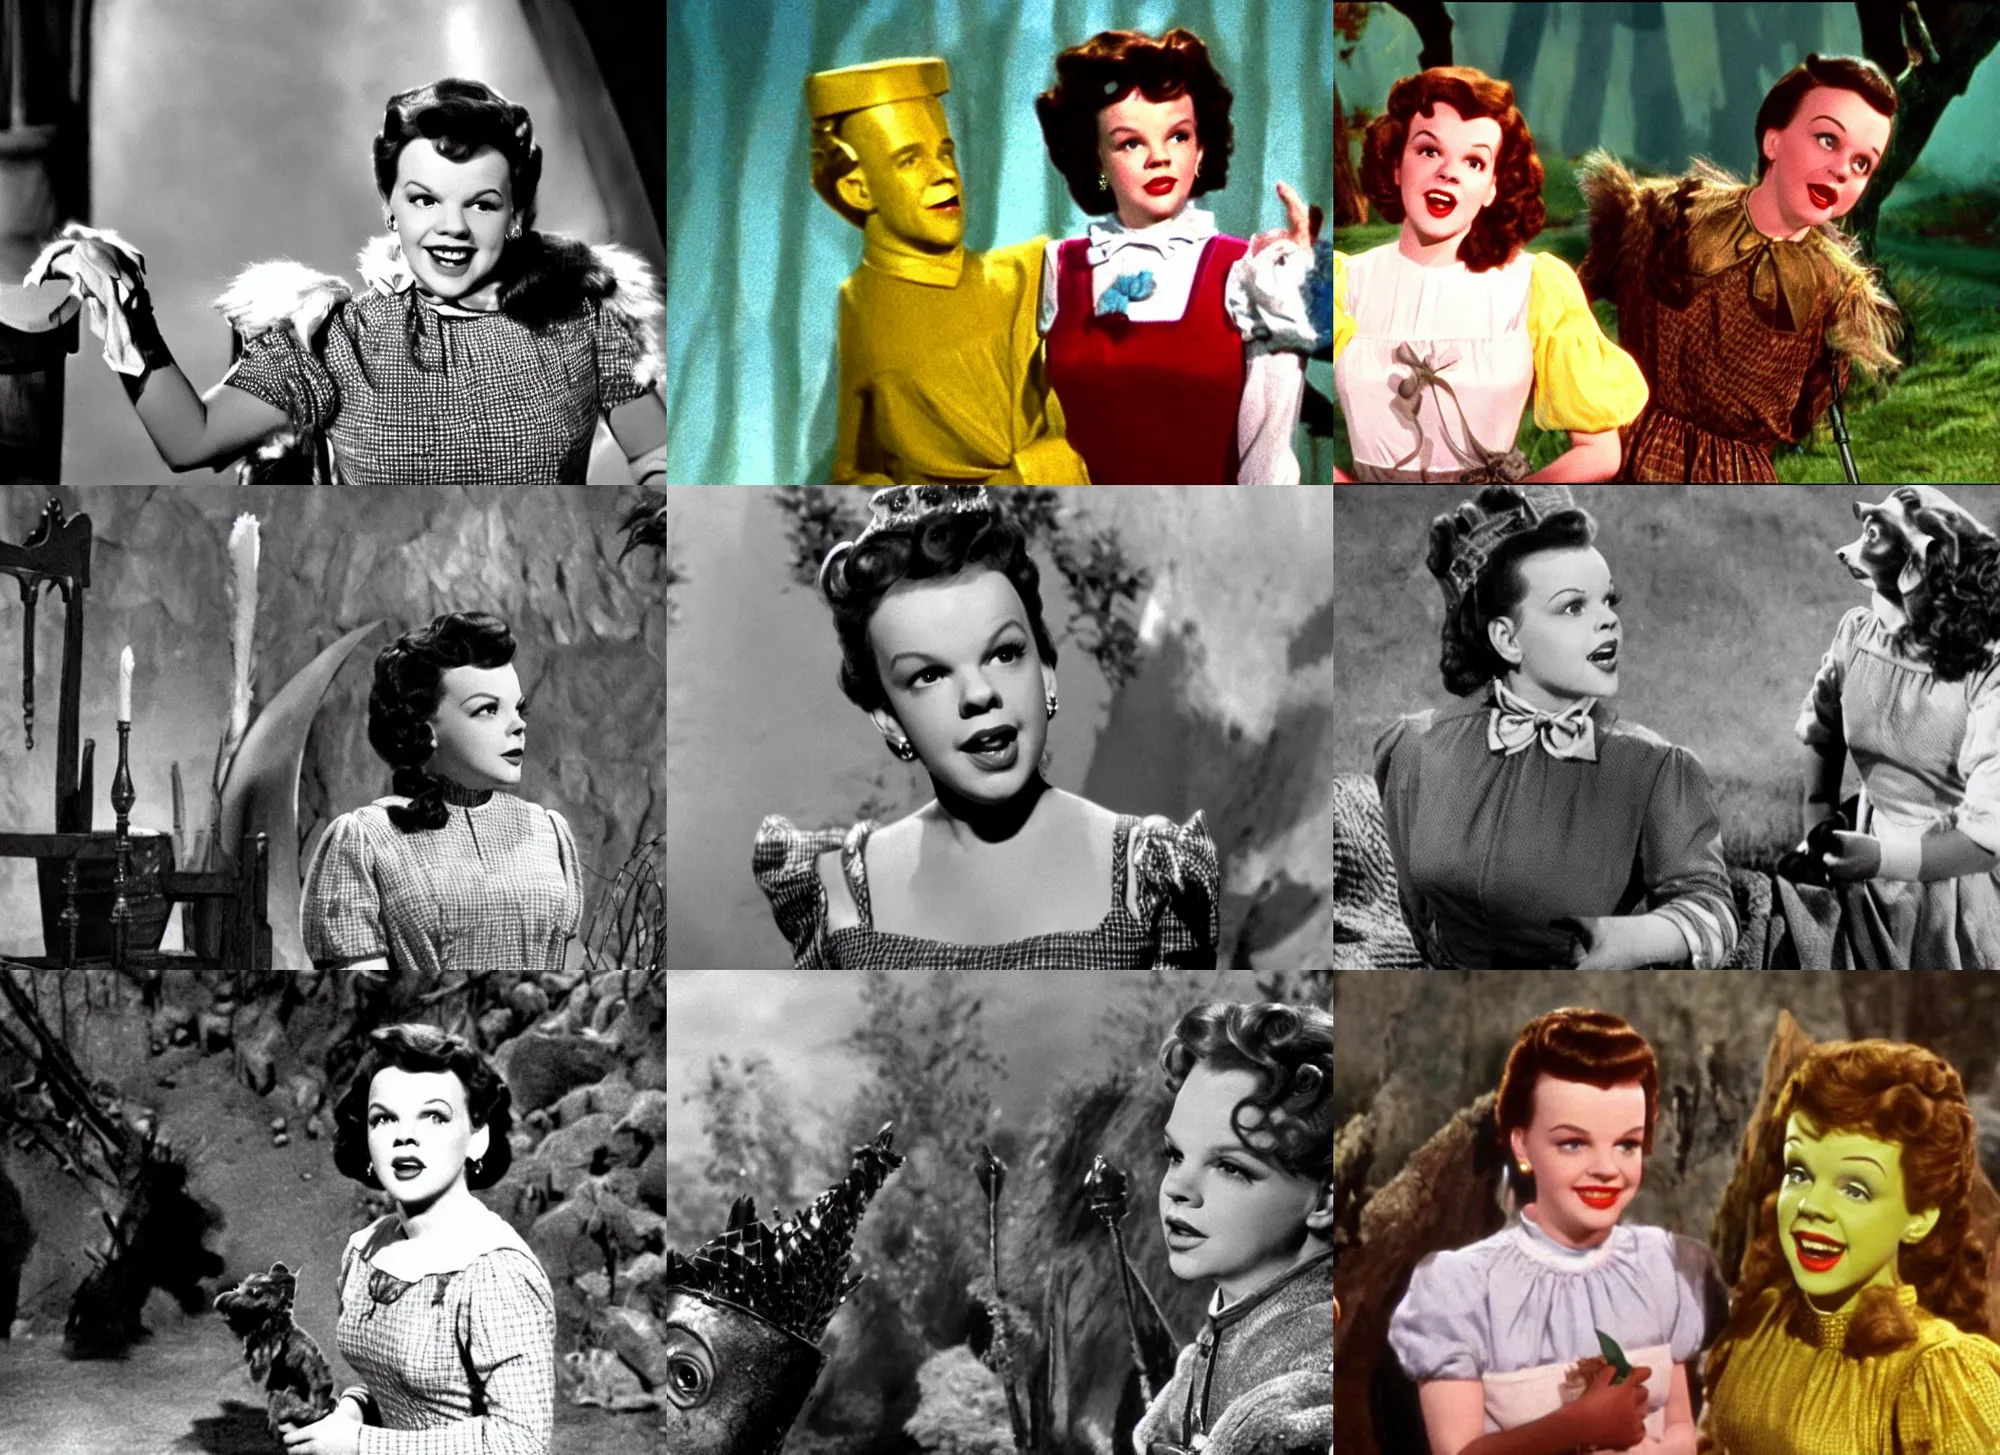 Prompt: judy garland as dorothy from wizard of oz in that game of thrones scene